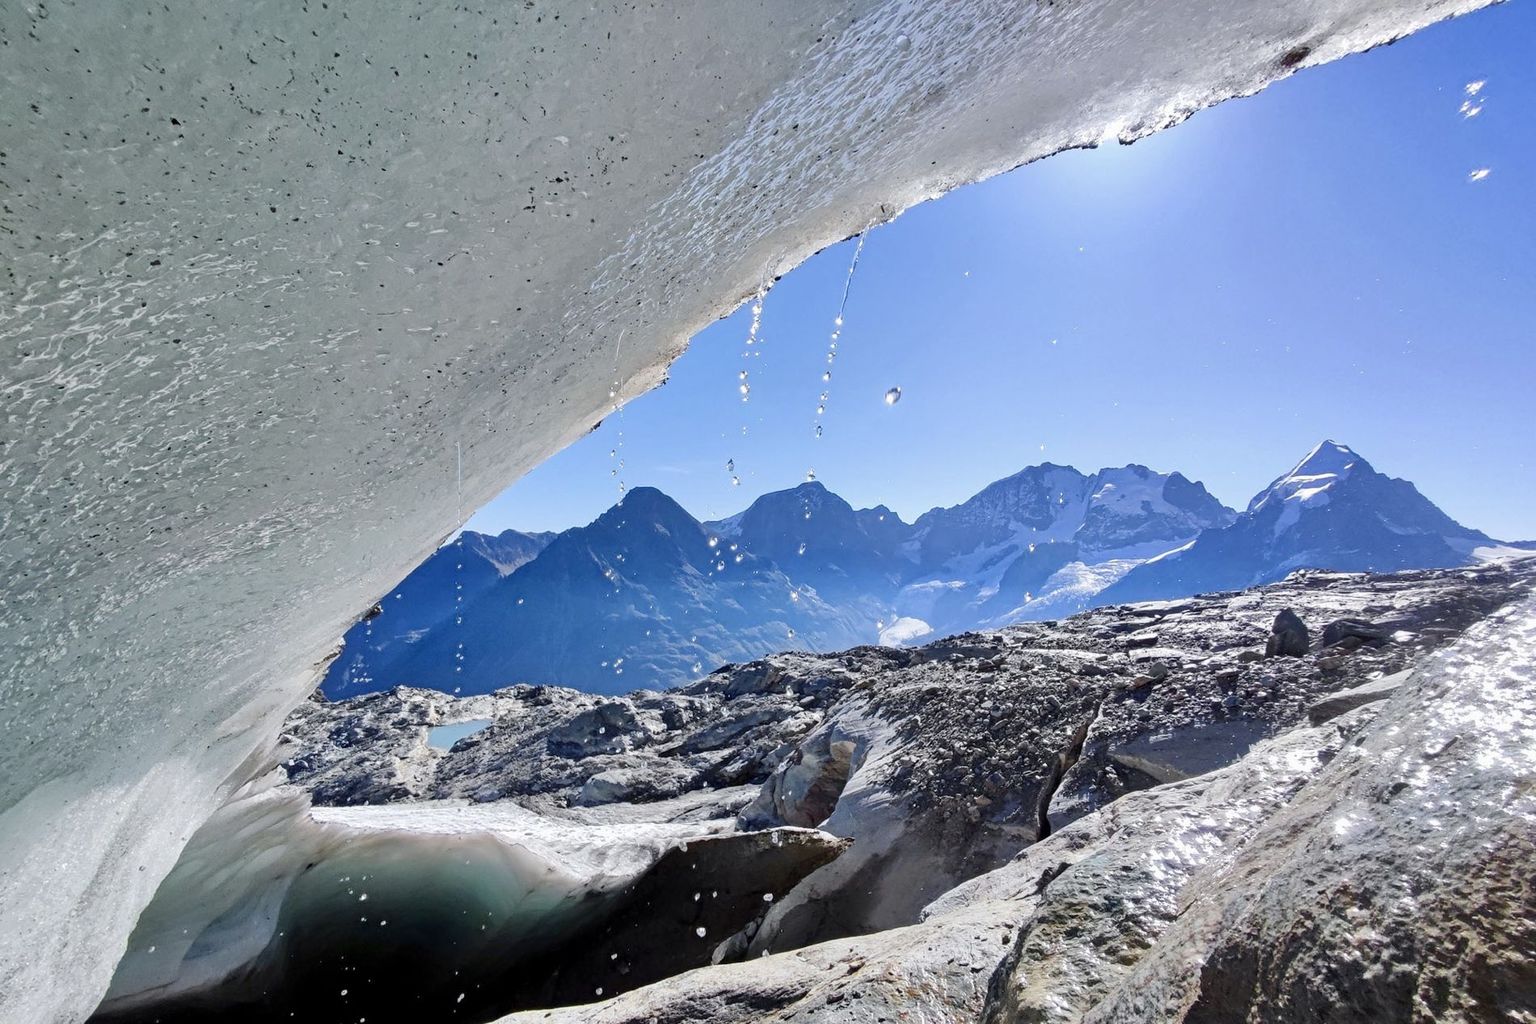 Ice on the Vadret dal Murtèl (Grisons) melted rapidly even in mid-September at an altitude of 3100 metres at the foot of the Piz Bernina.